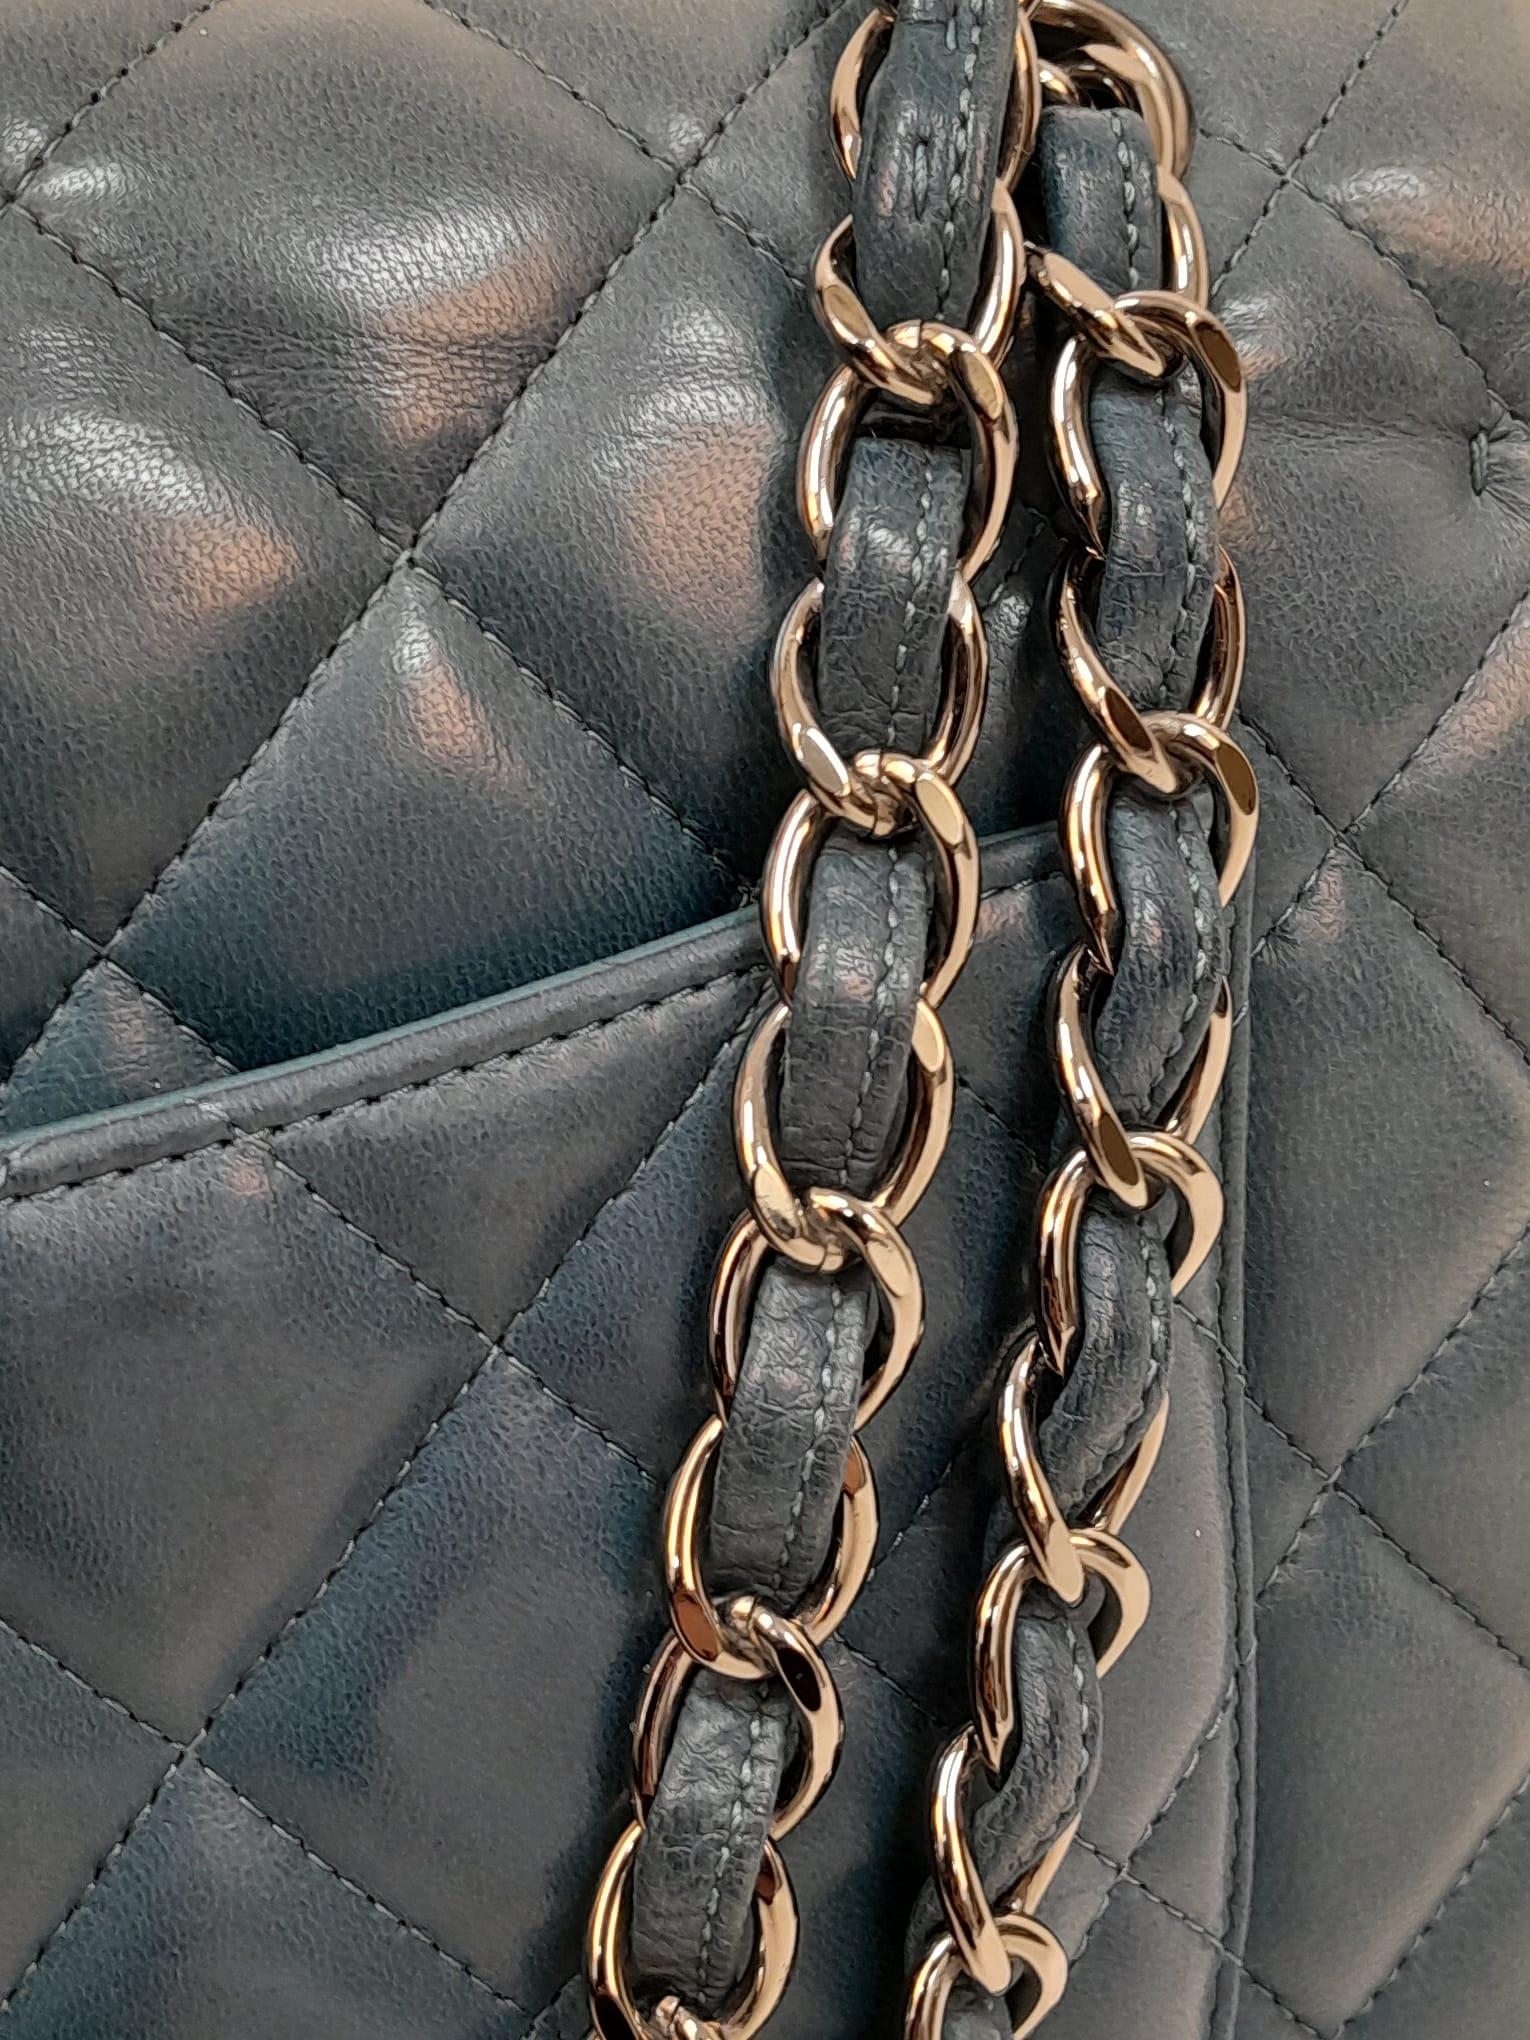 A Chanel Teal Jumbo Classic Double Flap Bag. Quilted leather exterior with silver-toned hardware, - Image 10 of 14